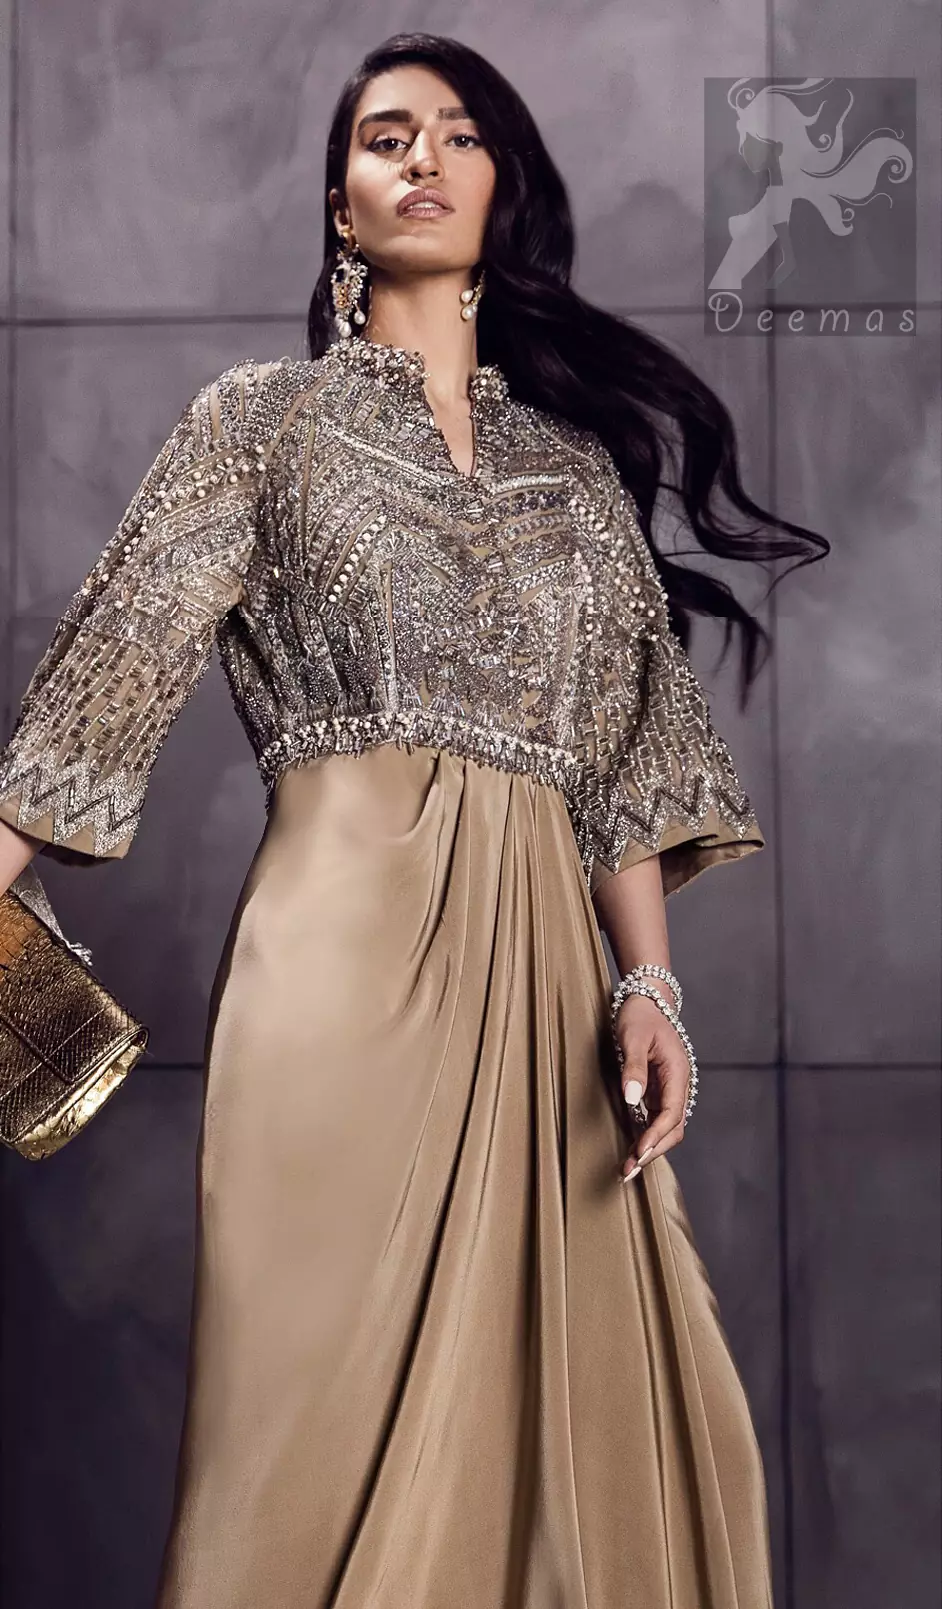 Fawn brown silky maxi has embellished bodice and sleeves. Bodice and sleeves have been embellished with dark gray embellishment and ivory pearls. 